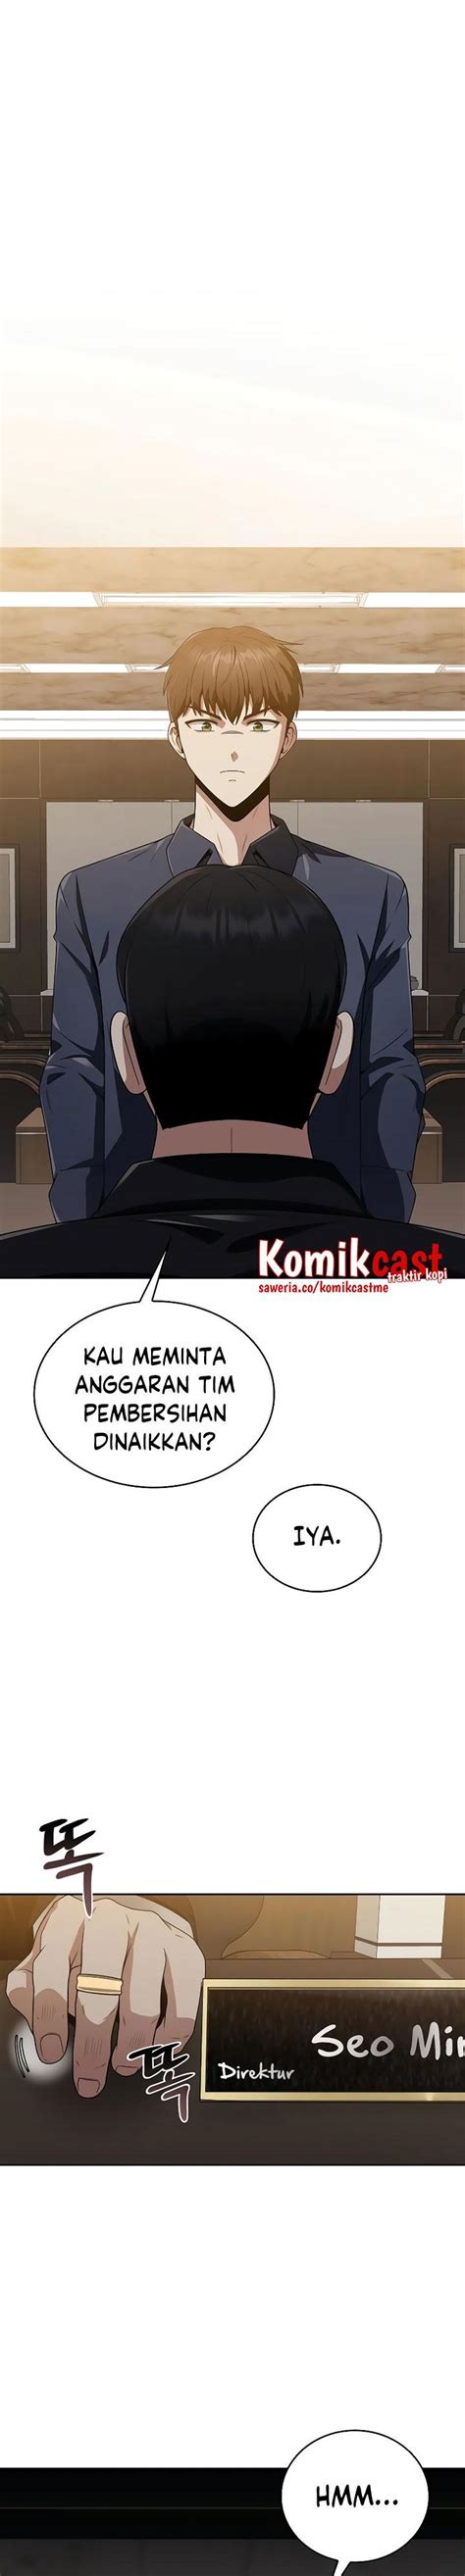 komik clever cleaning life of the returned genius hunter chapter 10 komikcast